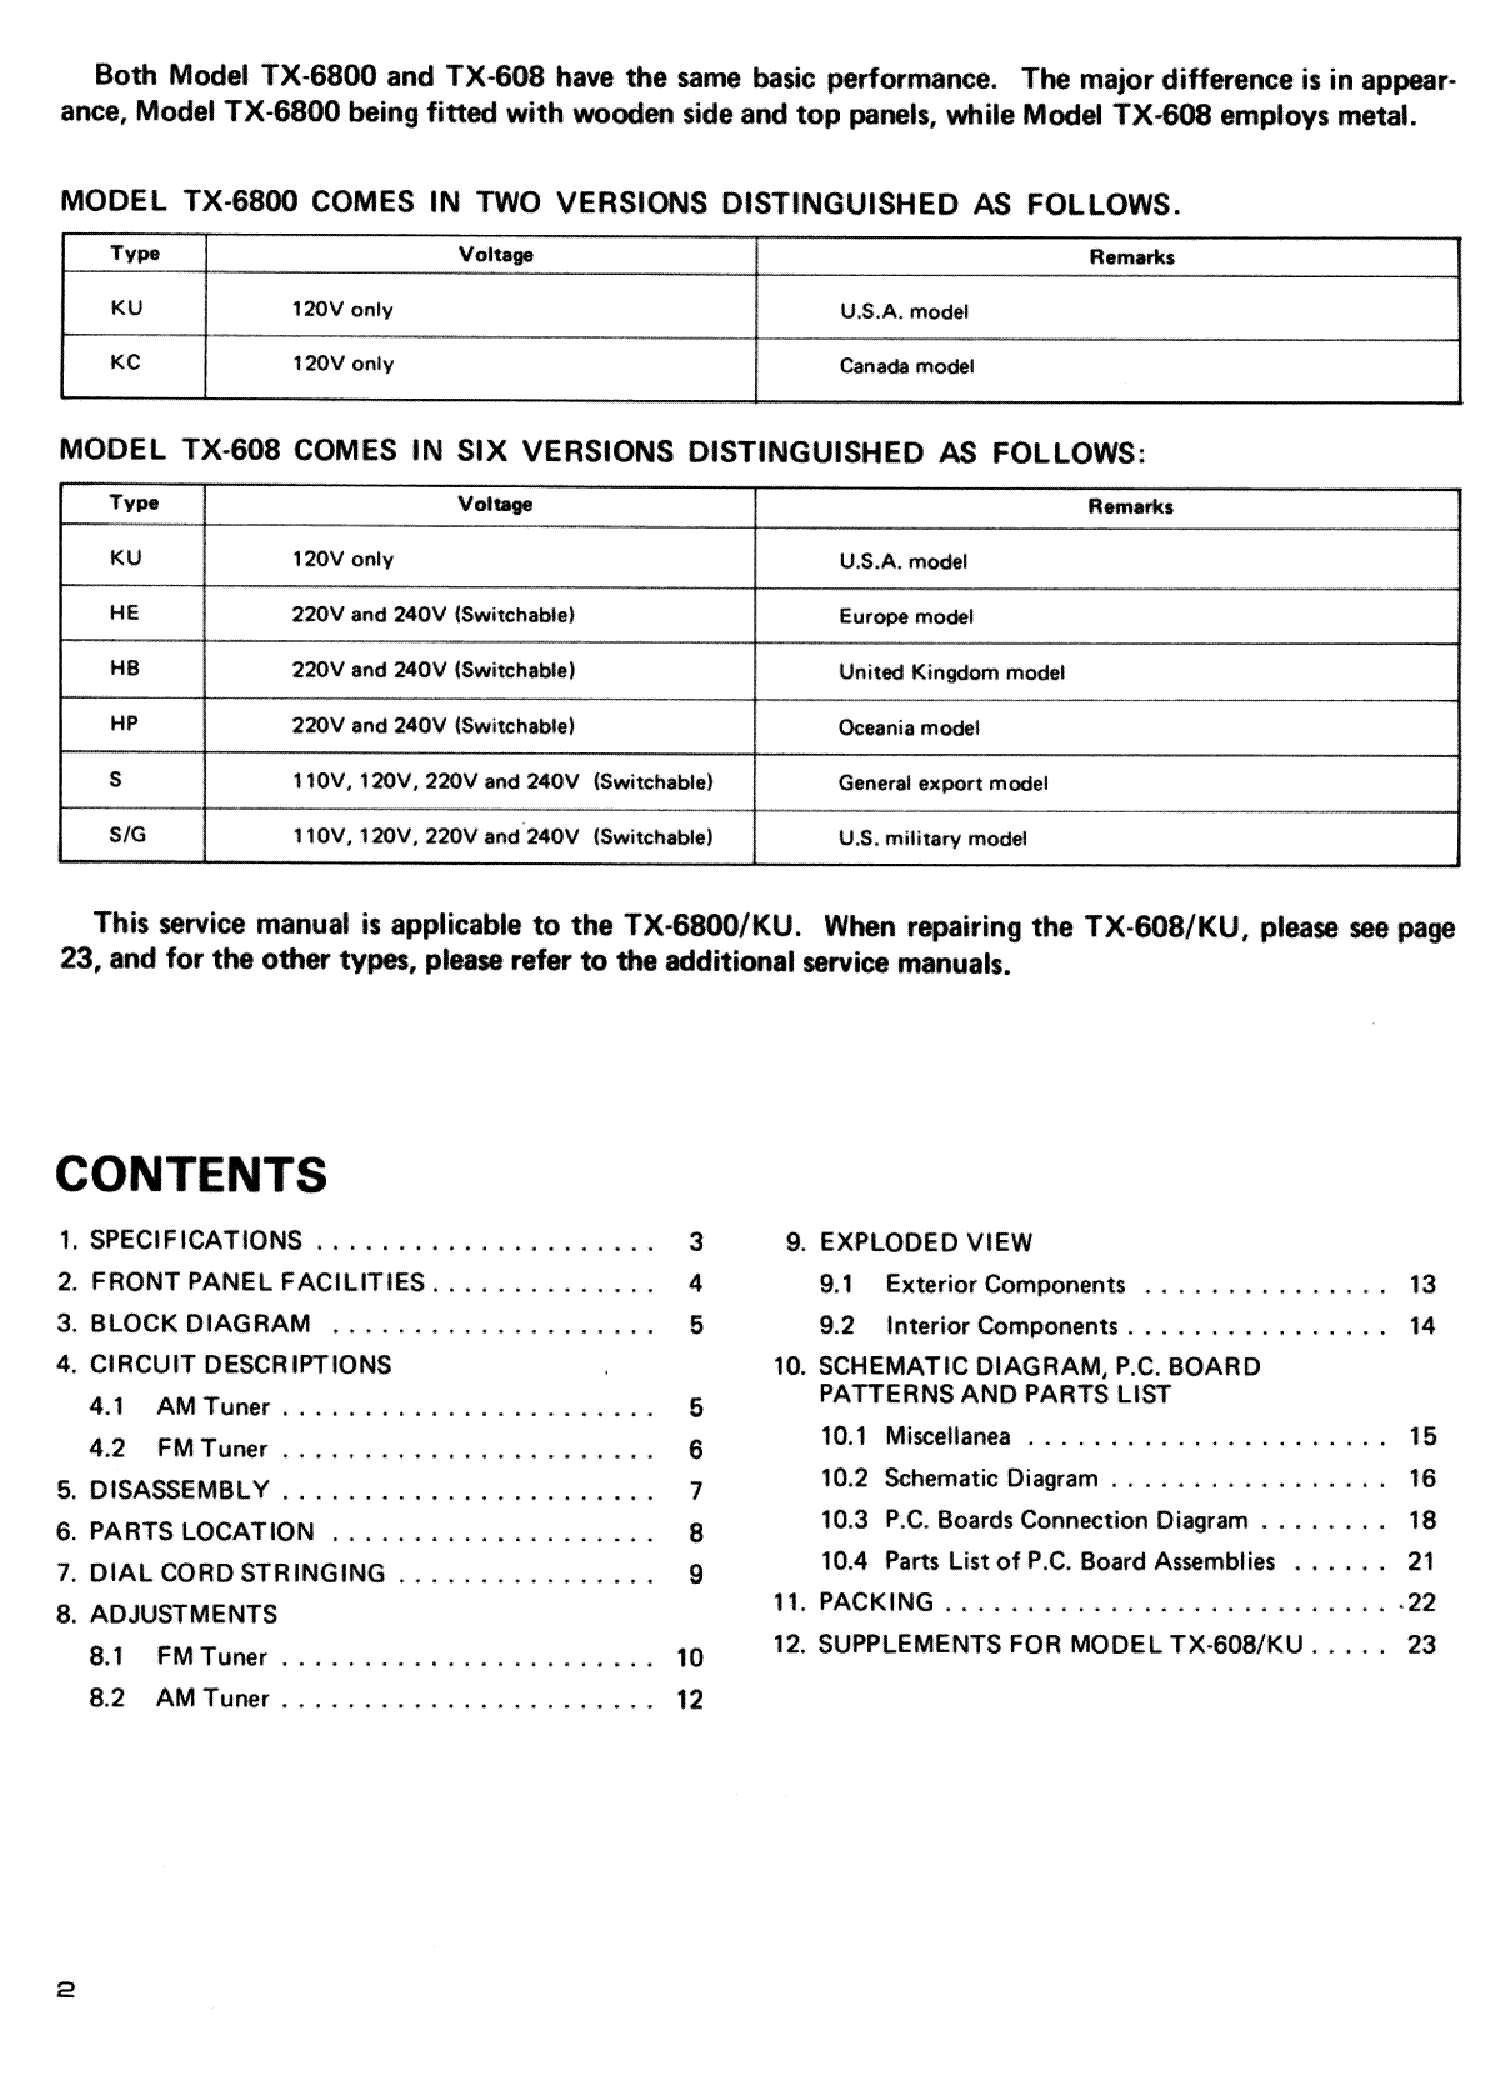 PIONEER TX-608 TX-6800 service manual (2nd page)